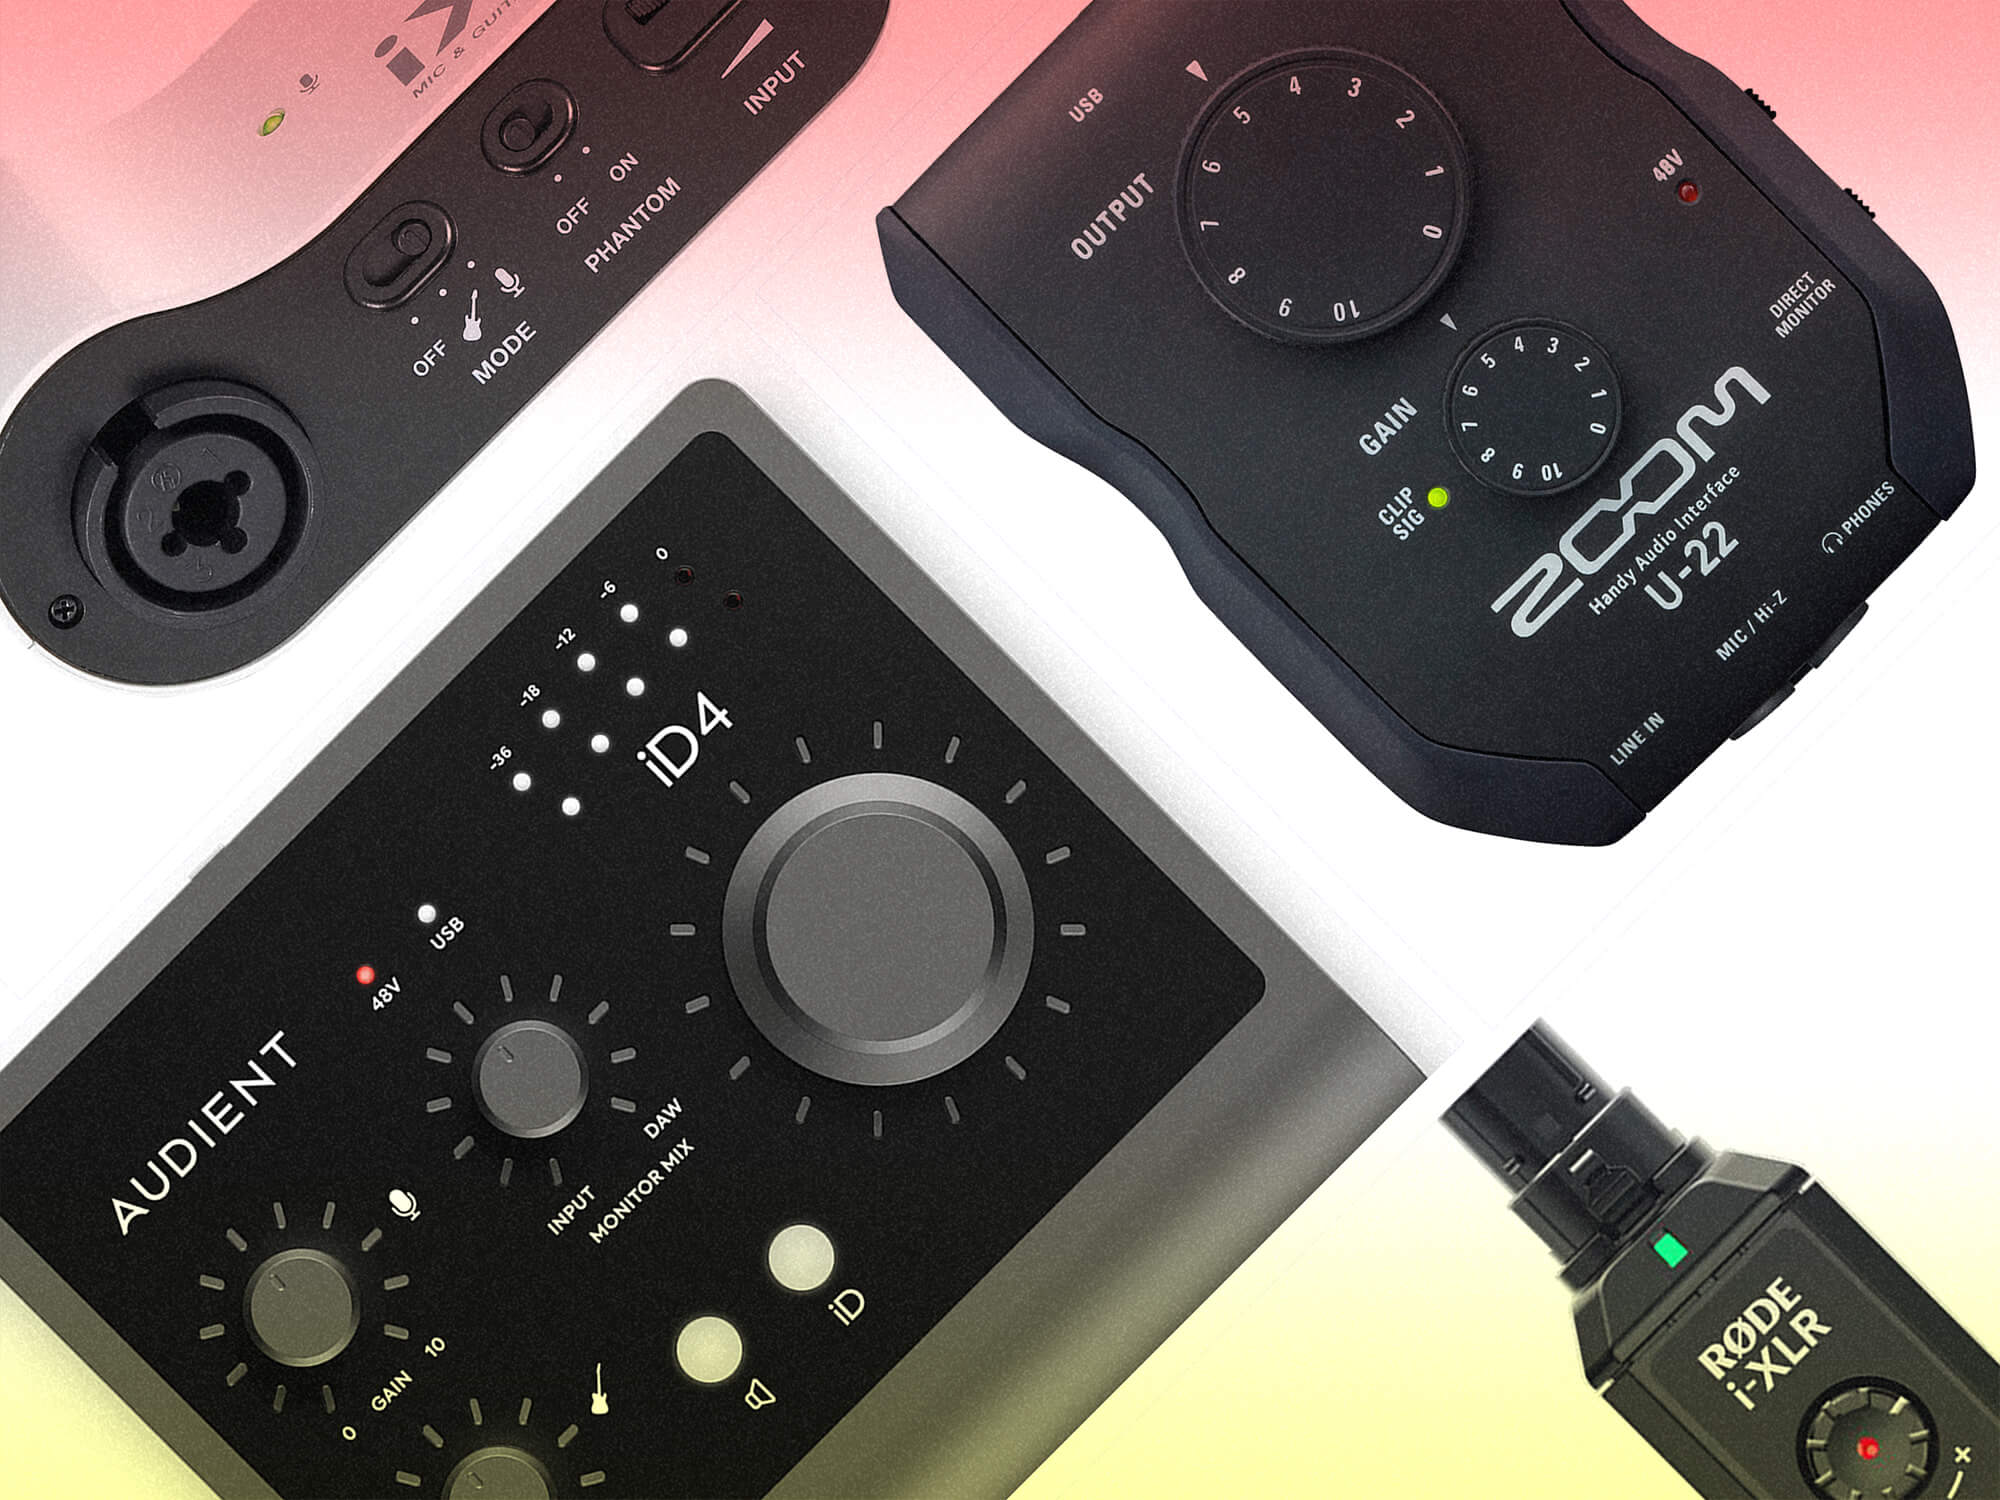 SKP PRO AUDIO SMART TRACK 2 Mobile Audio Interface Compatible with Android and IOS Devices